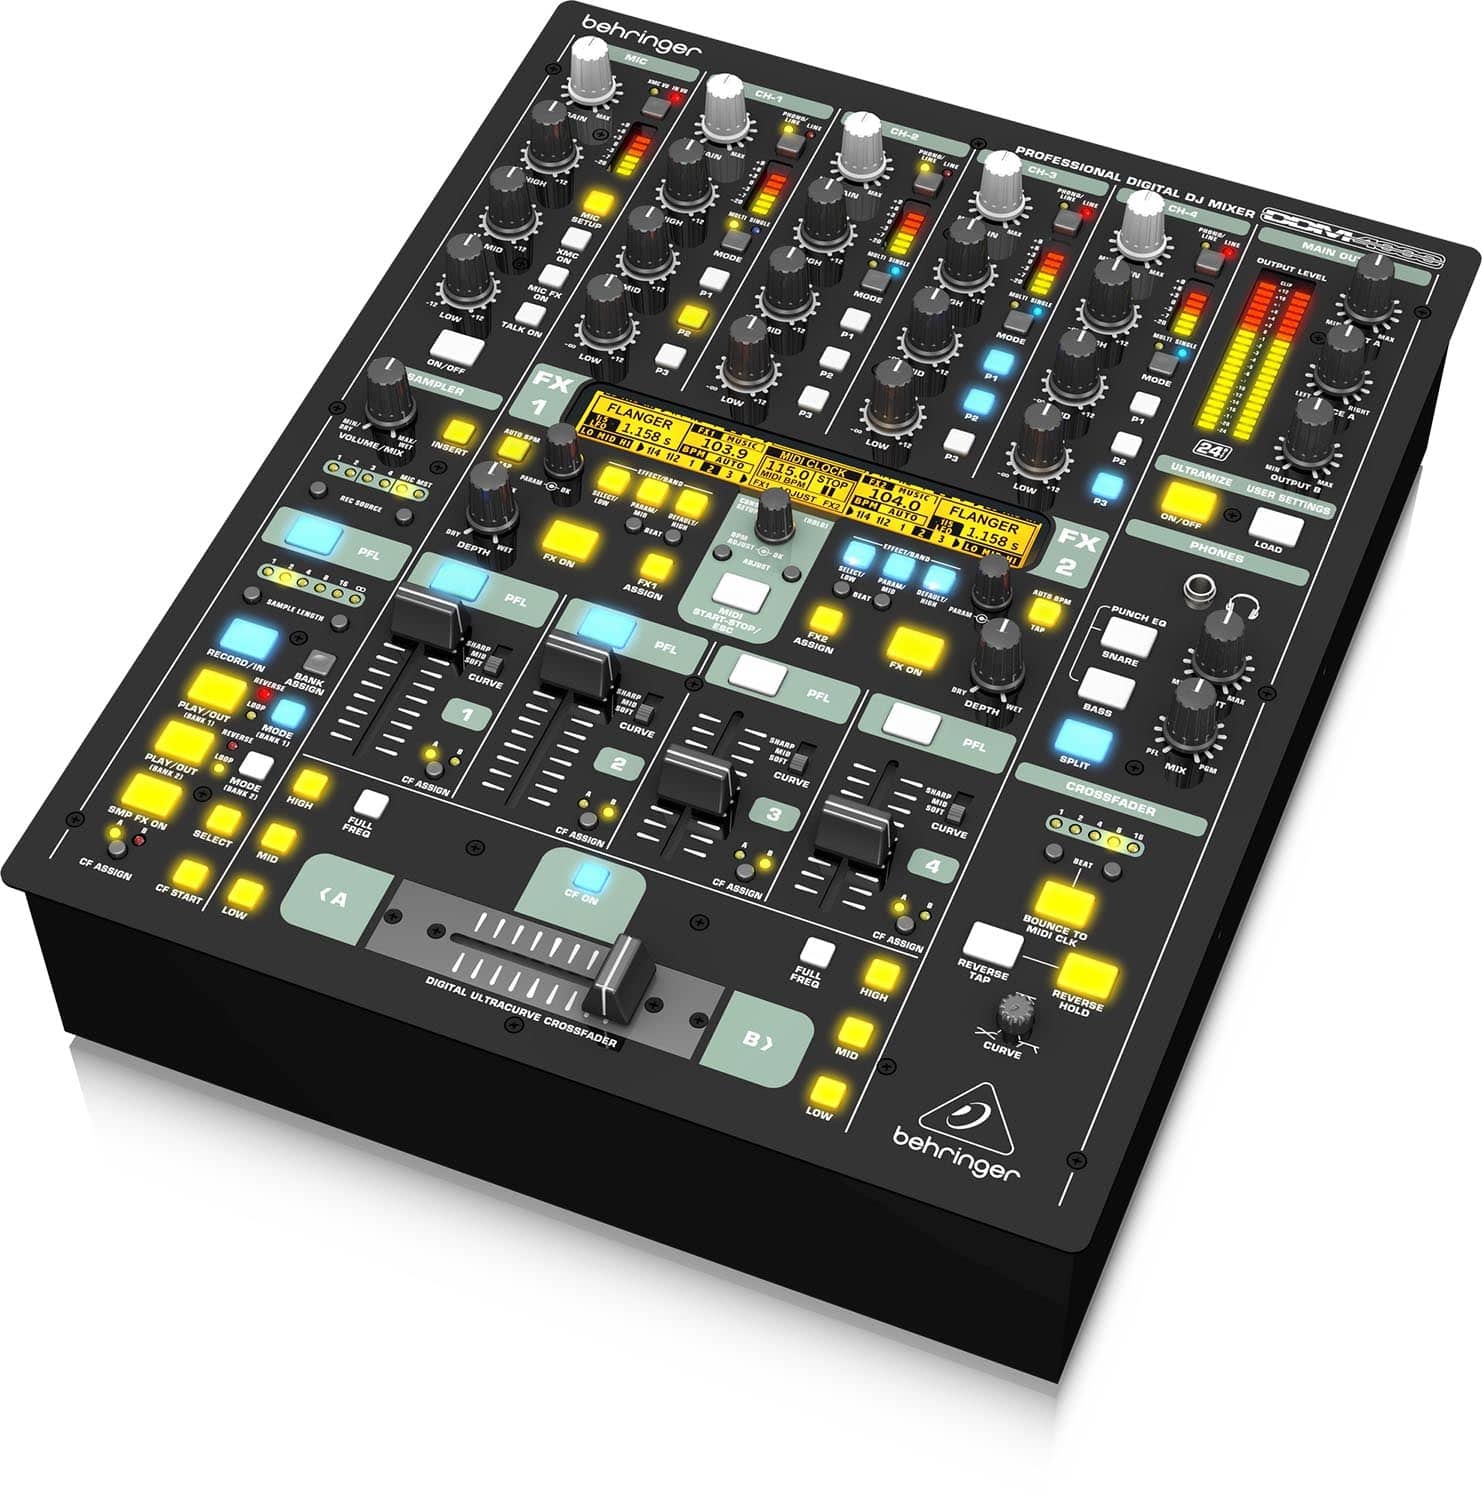 Behringer DDM4000, Ultimate 5-Channel Digital DJ Mixer With Sampler, 4 FX Sections, Dual BPM Counters And MIDI - Open Box - Hollywood DJ